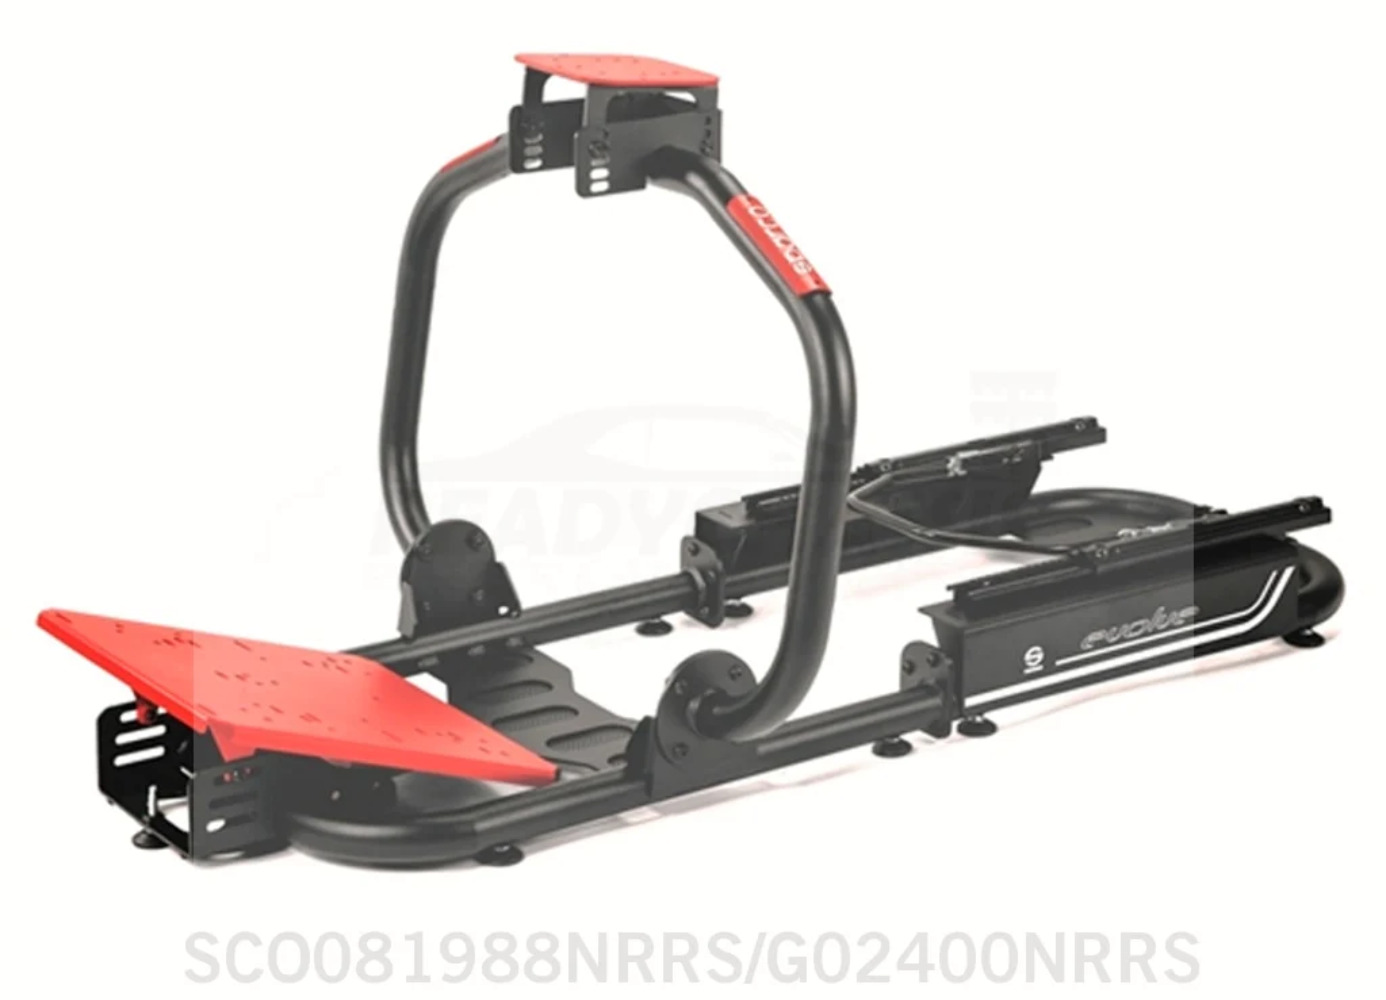 Fits Sparco Gaming Chassis Evolve 3.0 w/Pro Bracket Kit 081988NRRS/G02400NRRS